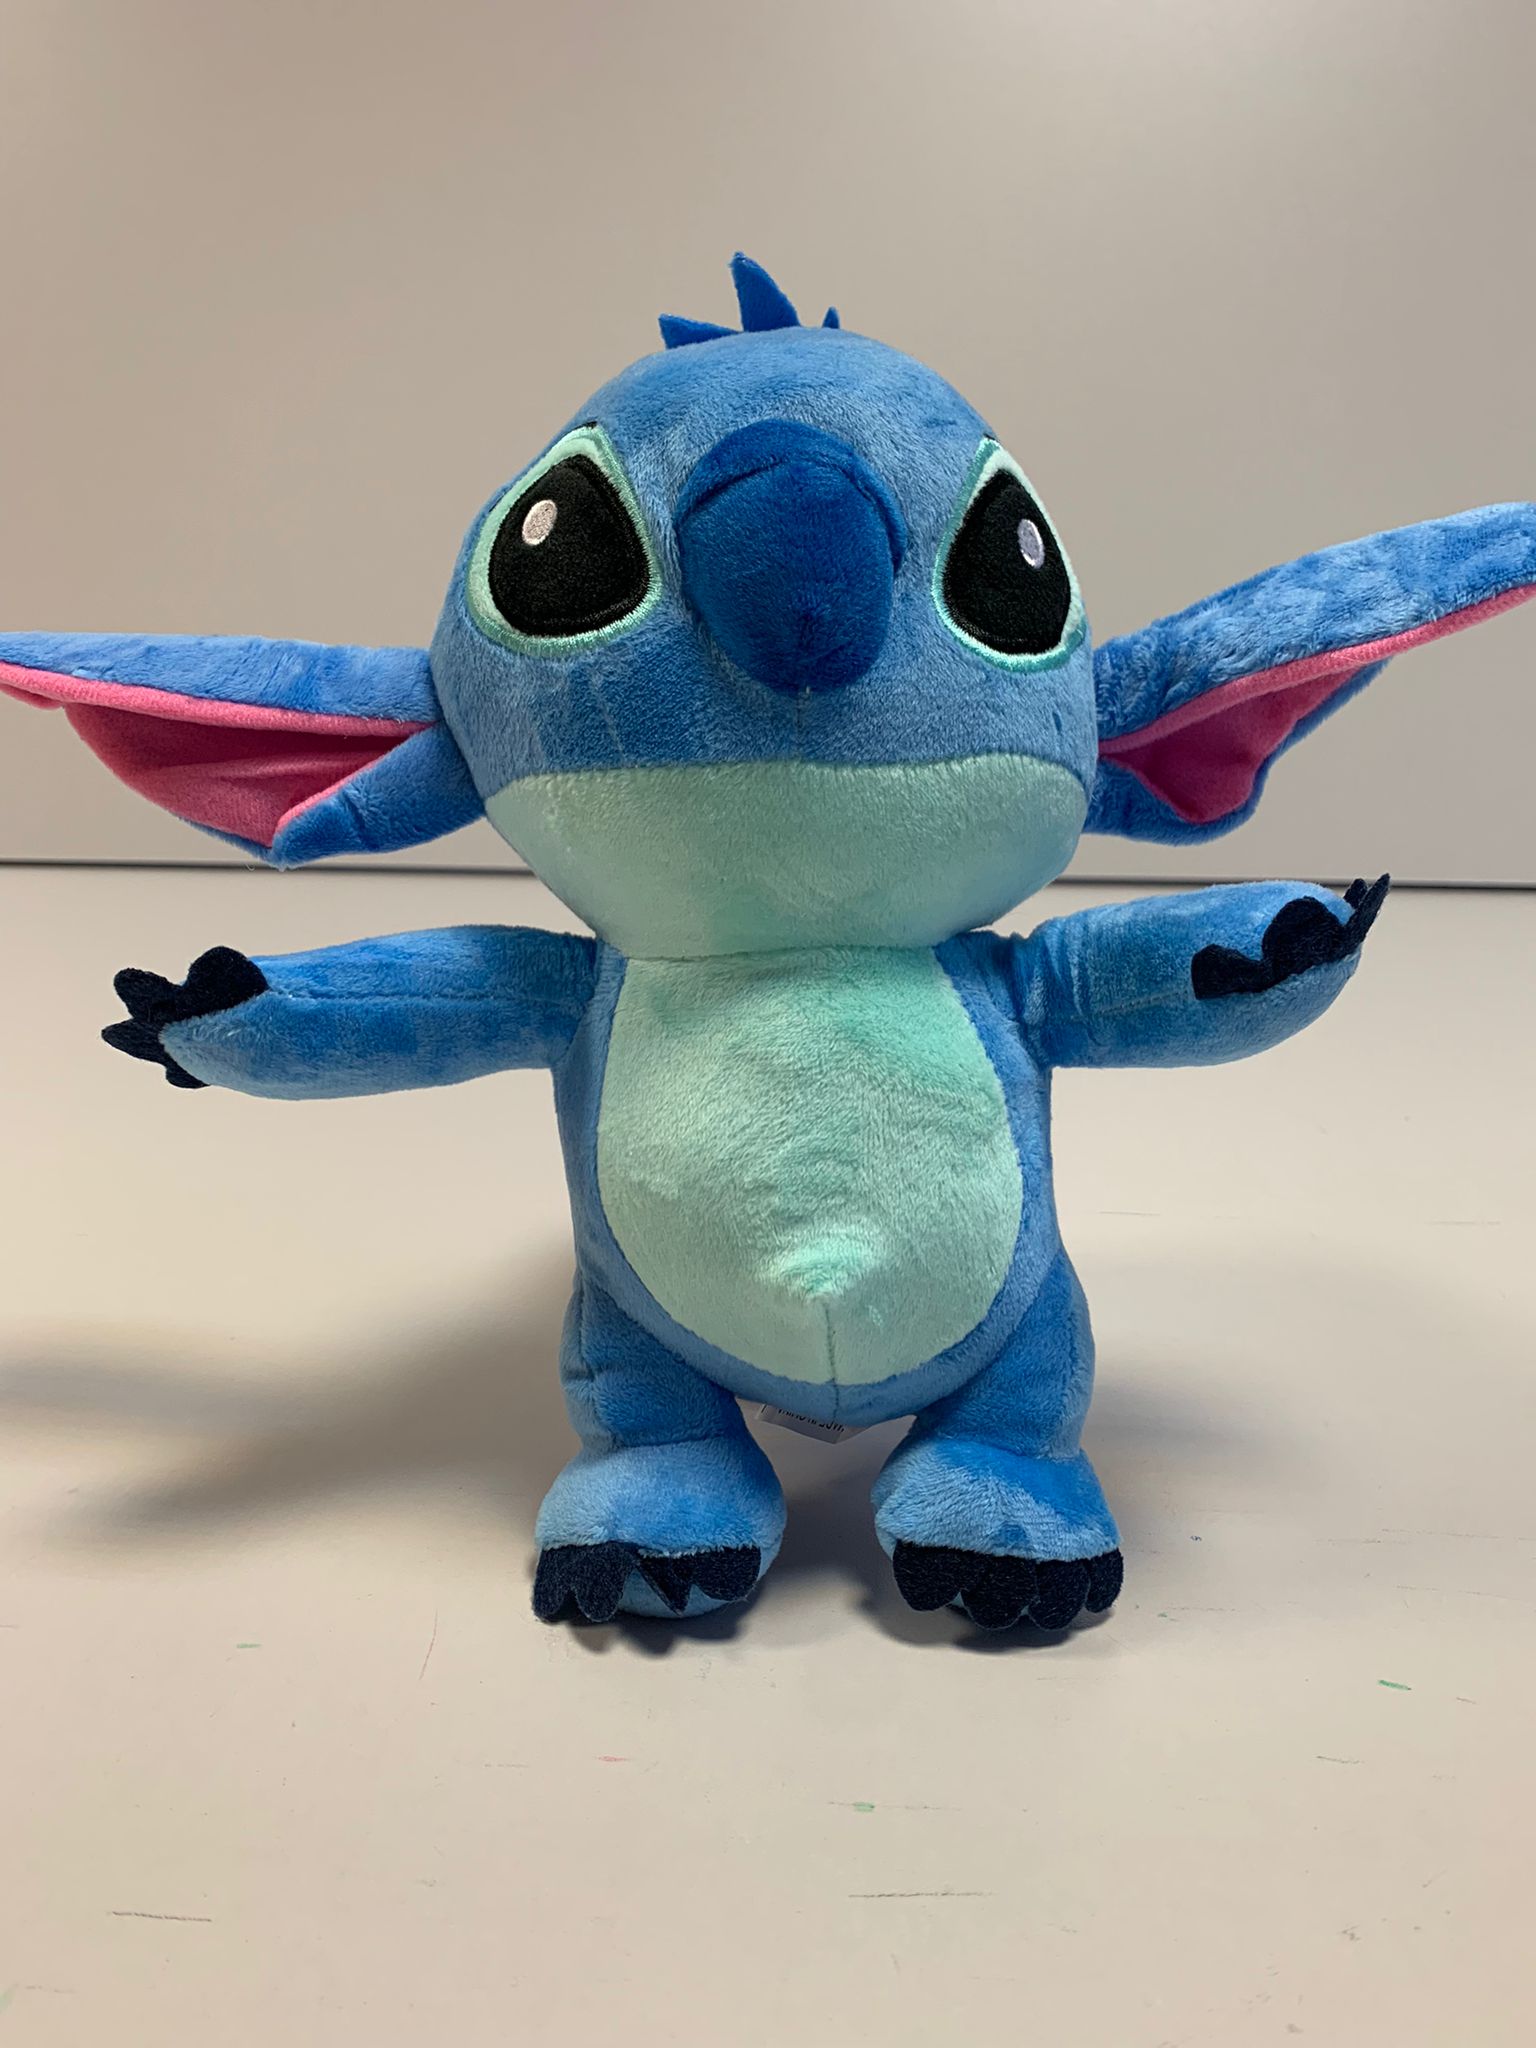 Stitch plush character from the fairy tale Lilo & Stitch